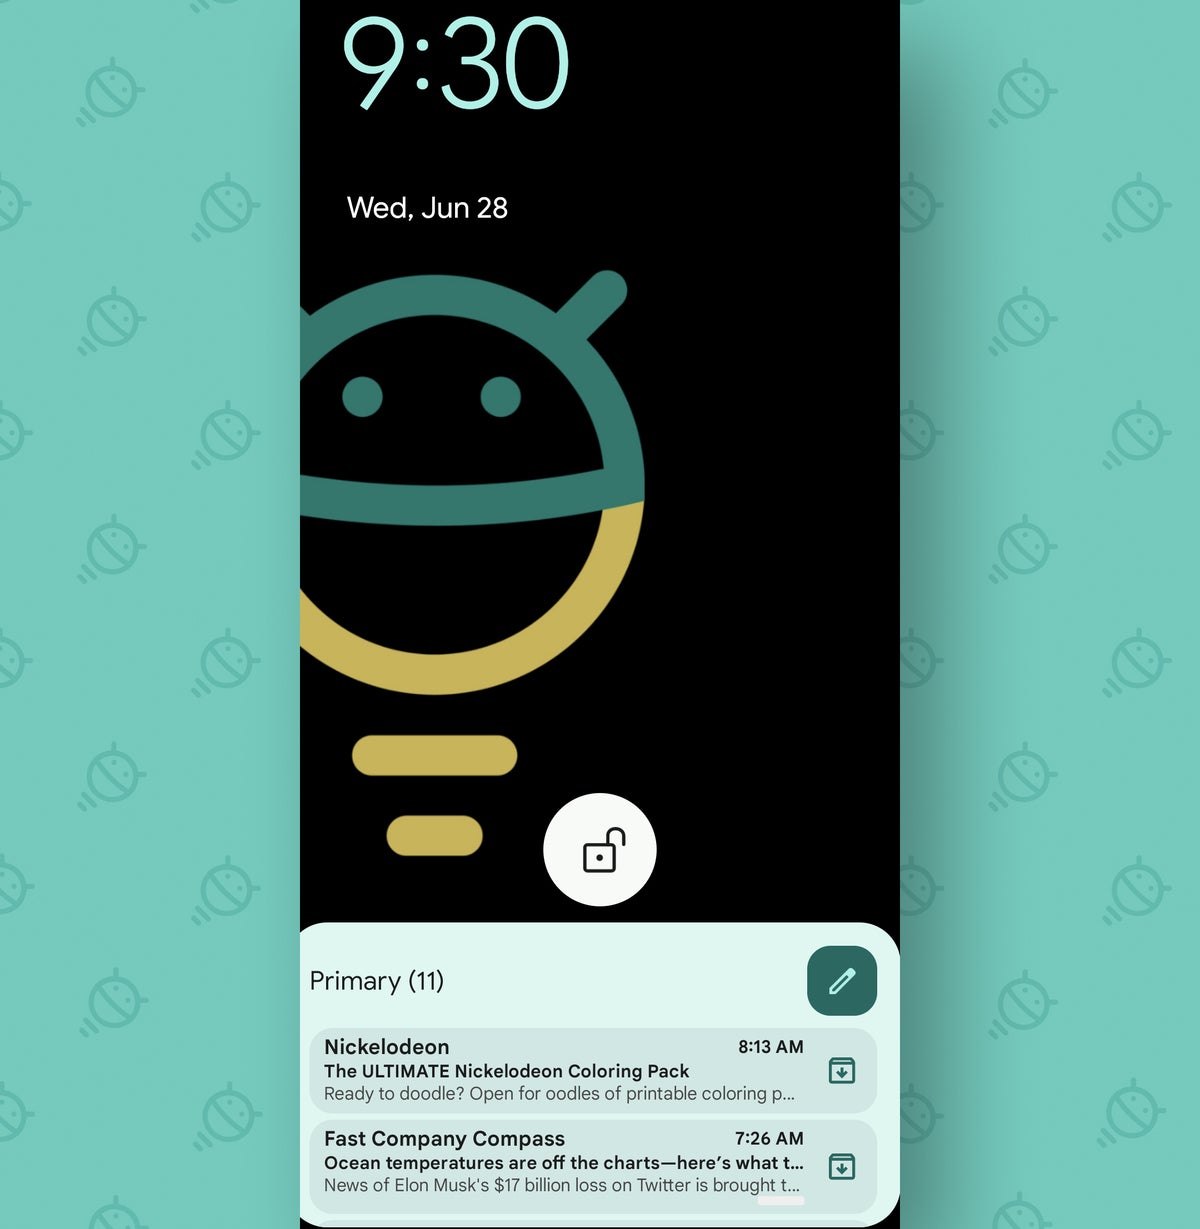 Android 14 brings new lock screen customization options, accessibility  features and more